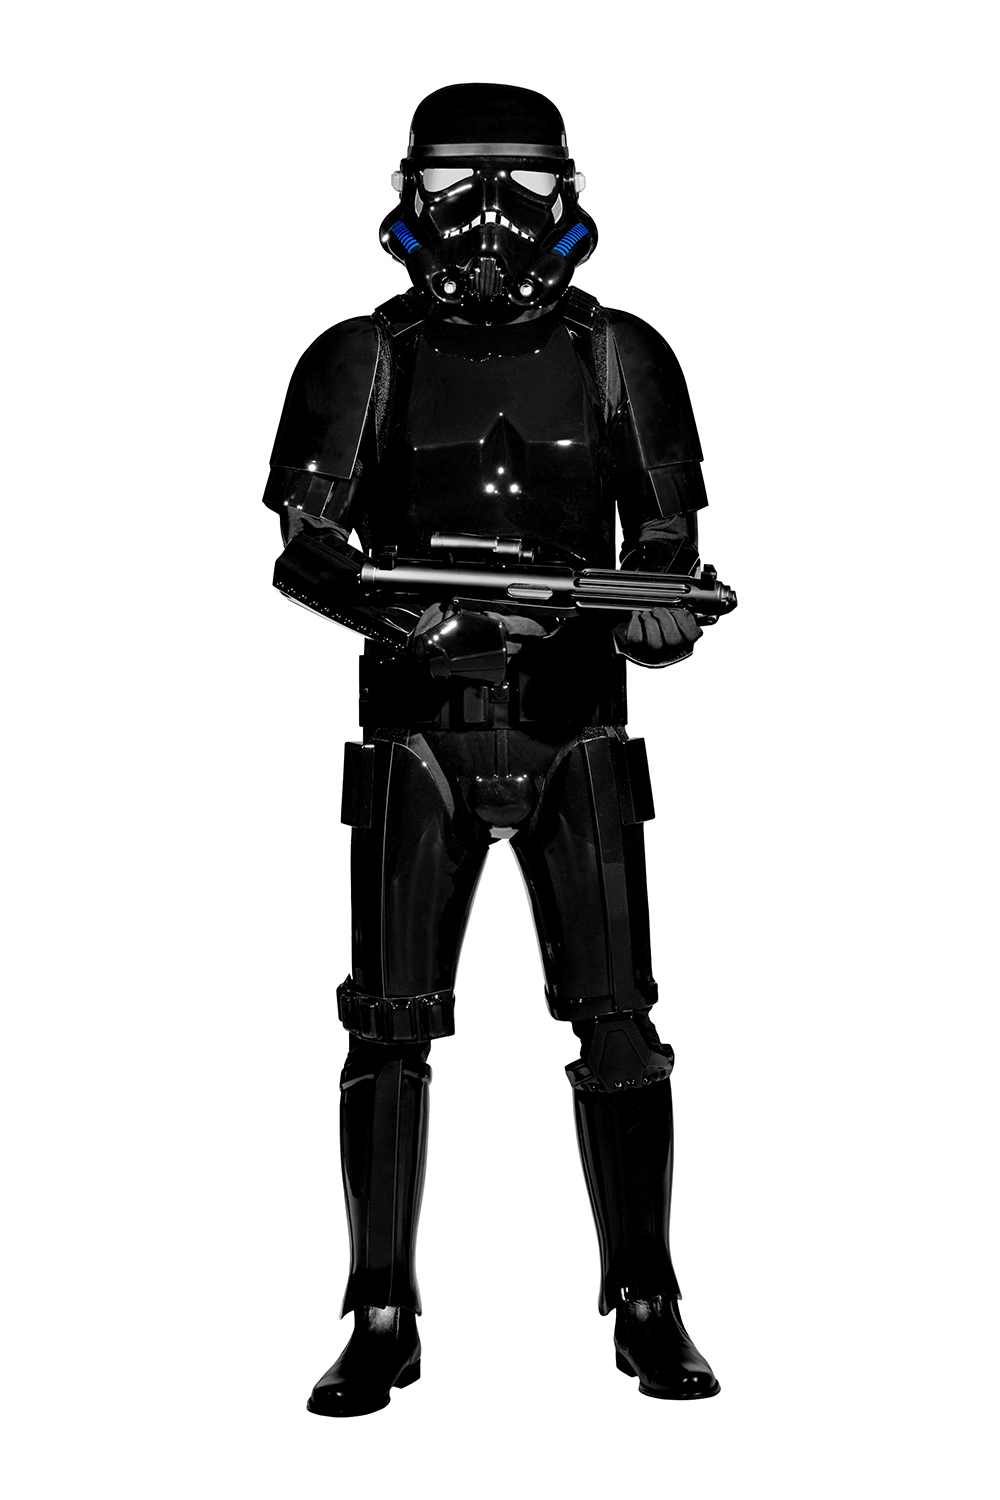 Shadowtrooper Costume Armour Packages available at www.Stormtrooper-Costumes.com - The Stormtrooper Shop